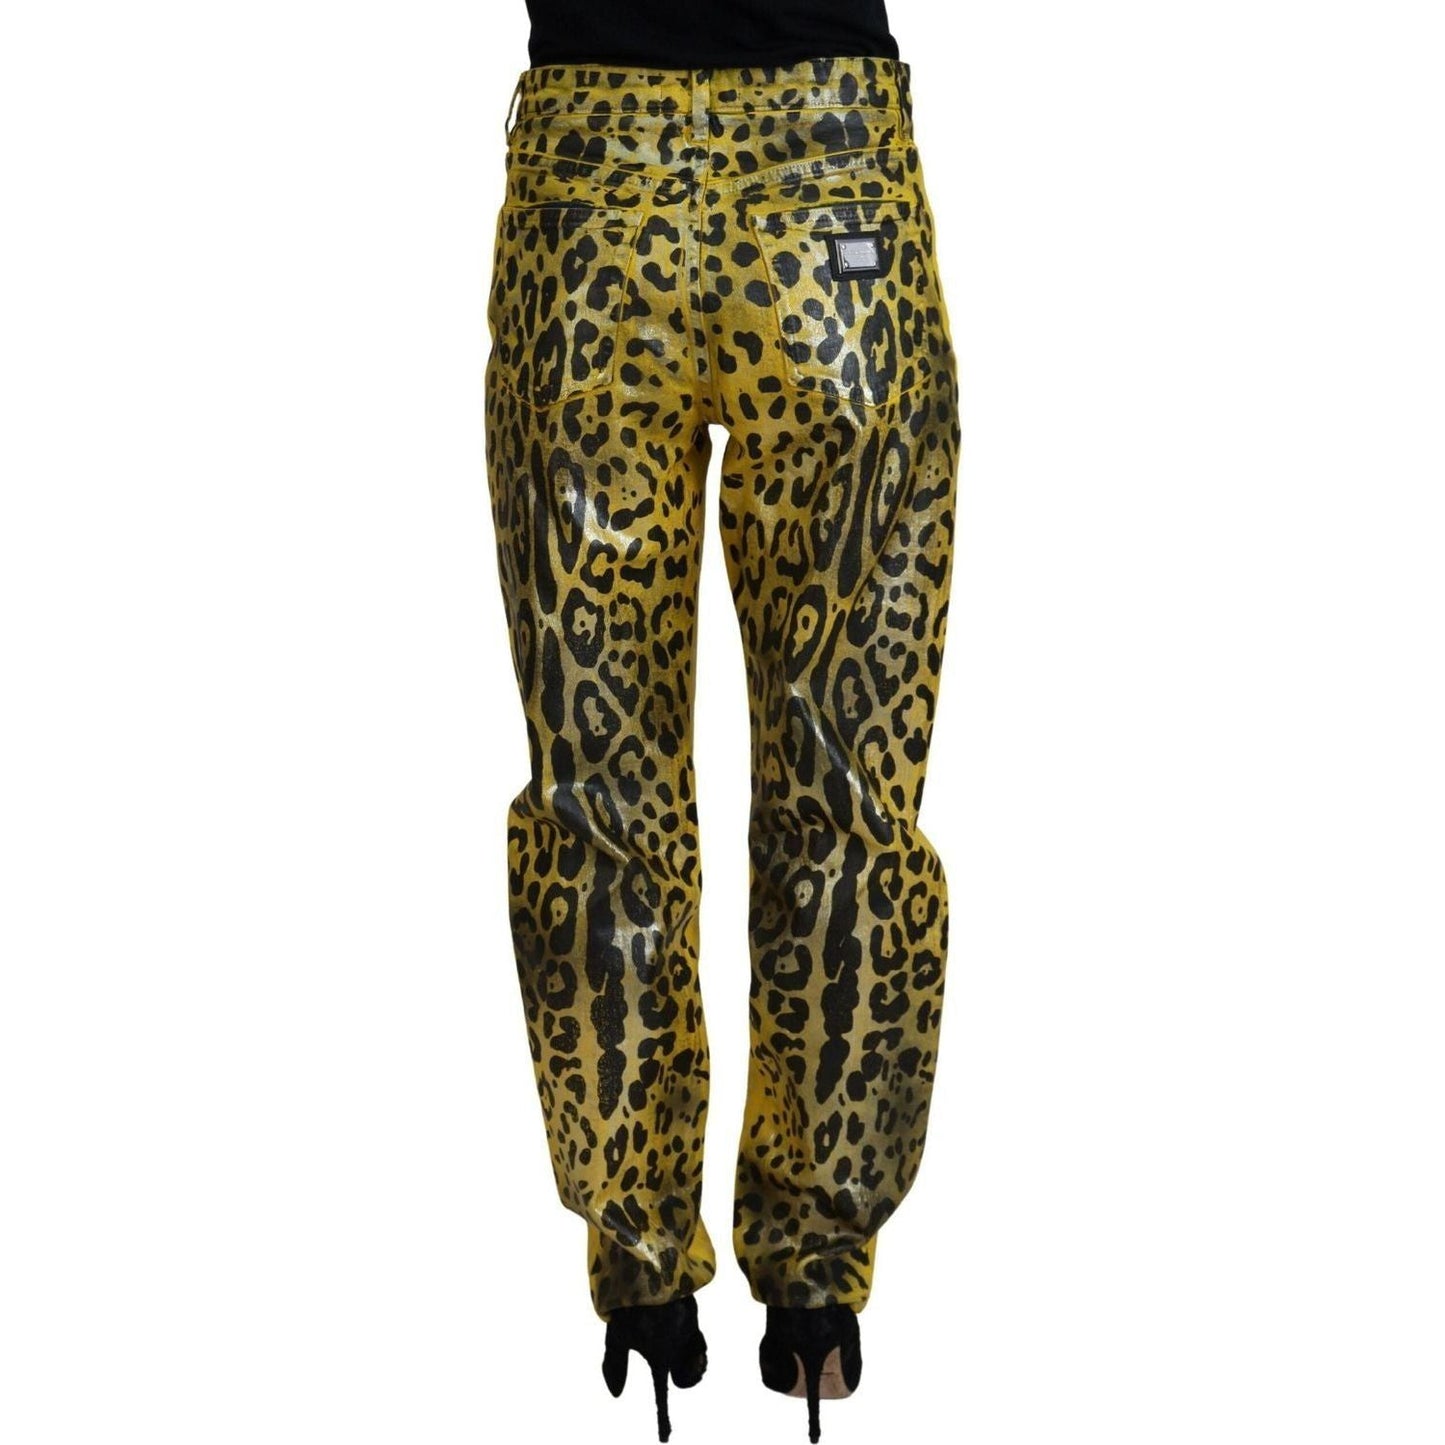 Dolce & Gabbana Chic High Waist Straight Jeans in Vibrant Yellow yellow-leopard-cotton-straight-denim-jeans IMG_7365-scaled-53e00c50-316.jpg